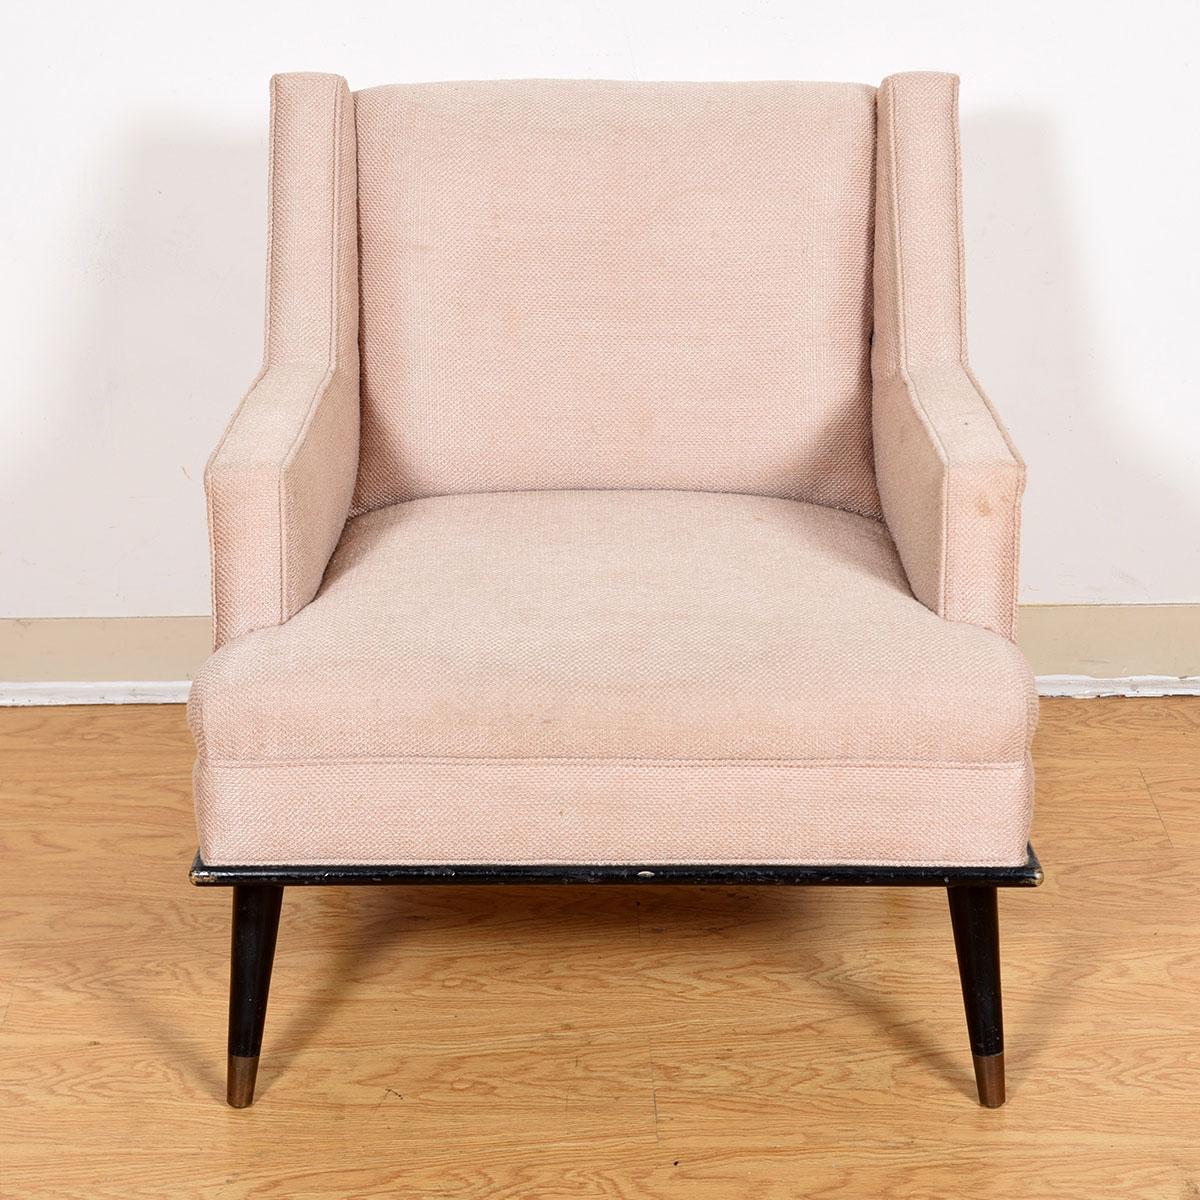 Mid-Century Modern Upholstered Club Chair by Milo Baughman for James, Inc In Good Condition For Sale In Kensington, MD